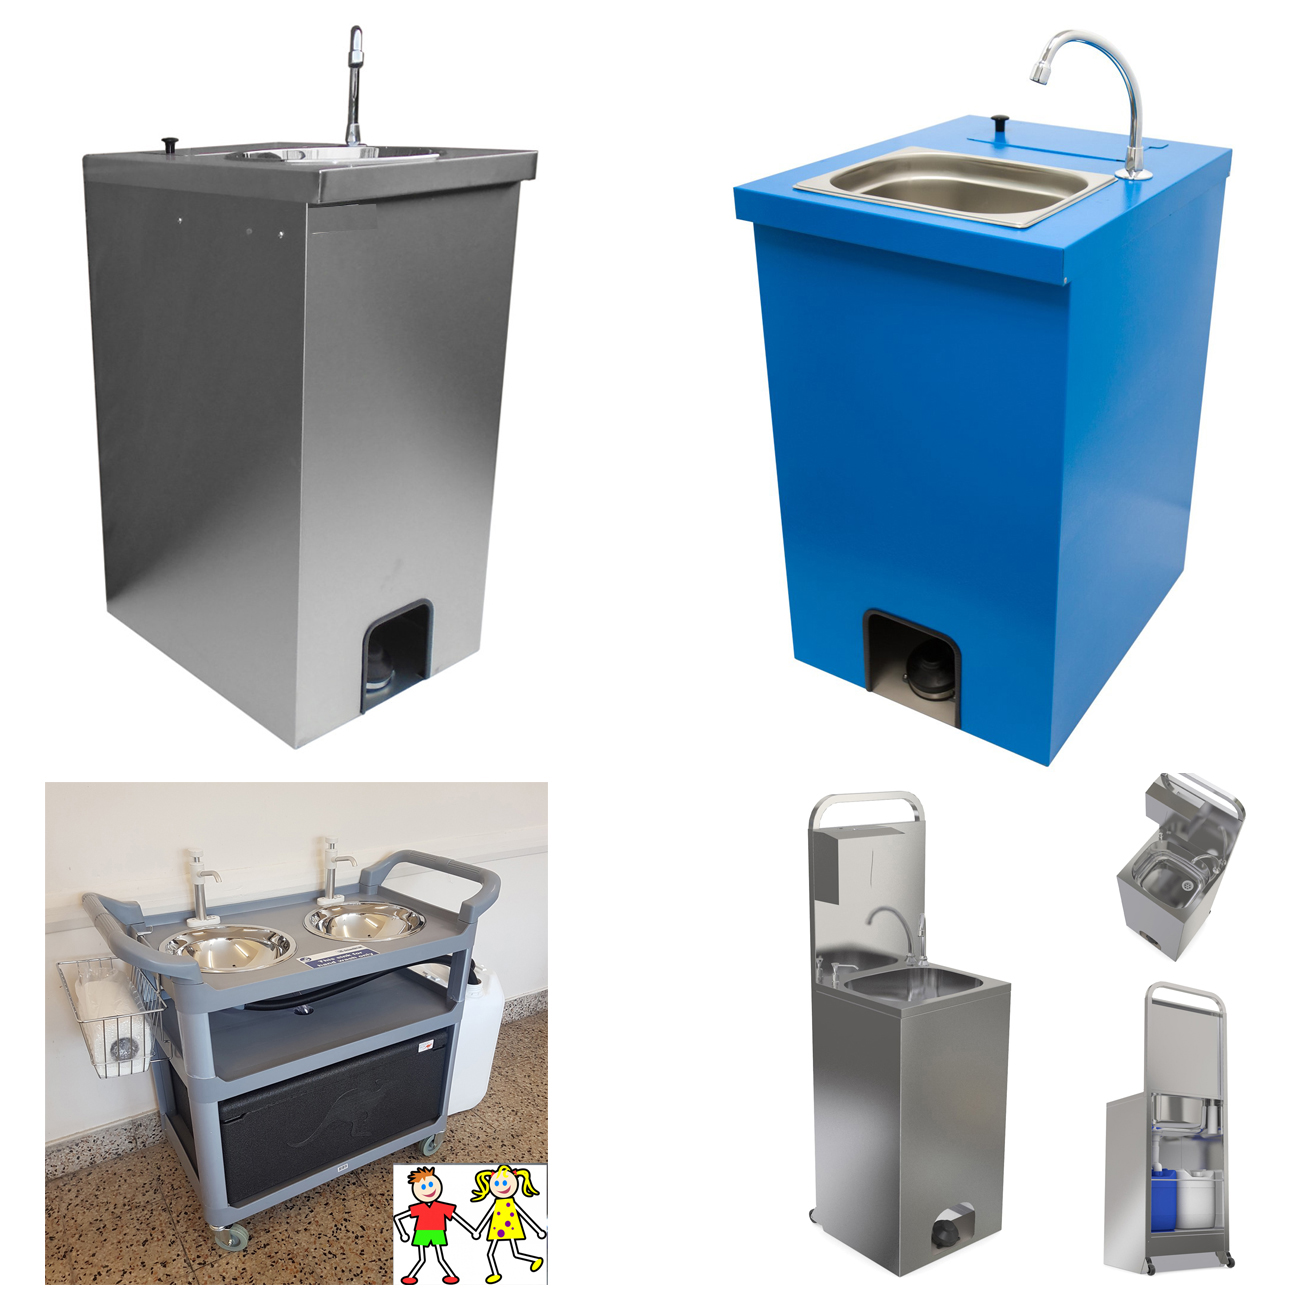 Portable hand wash sinks 9 variants from £325 COVID